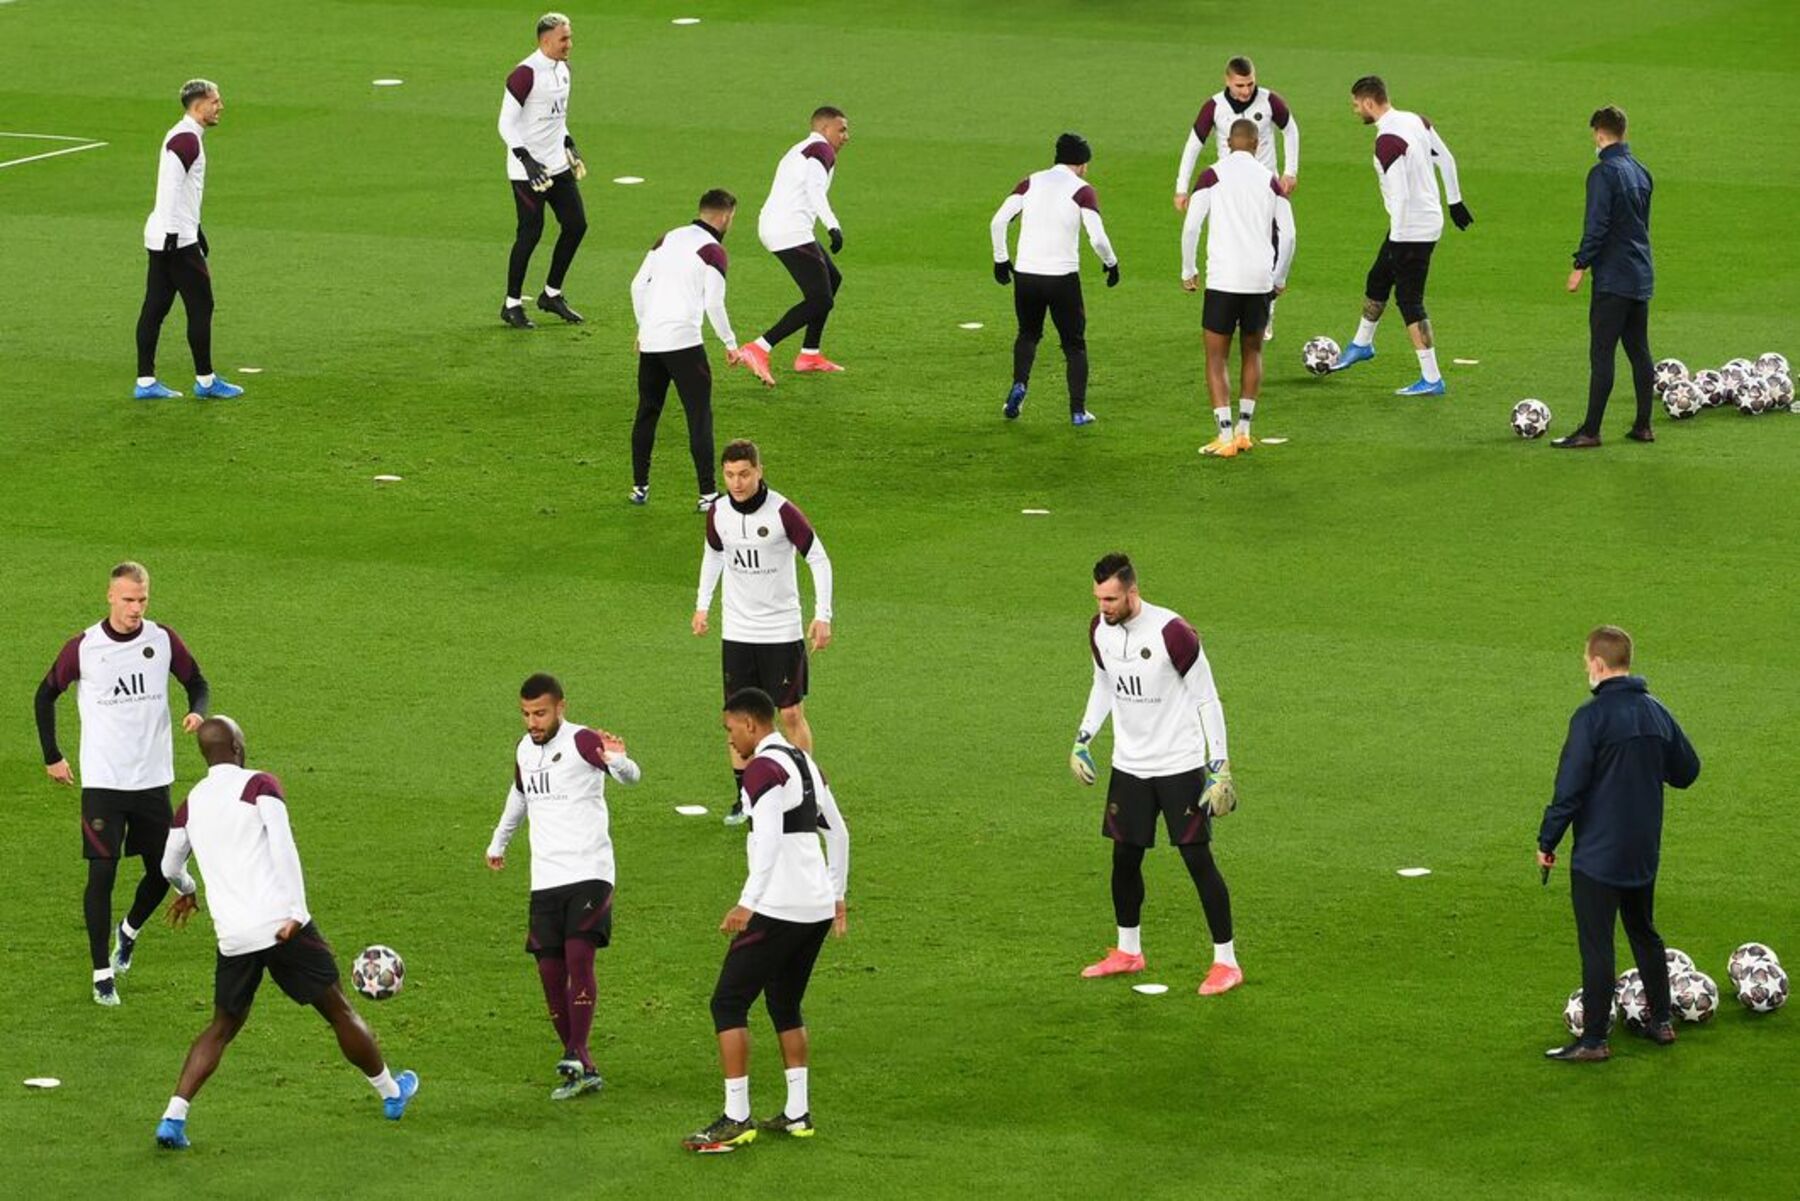 Video PSG Takes Part in a Training Session at the Camp Nou Ahead of